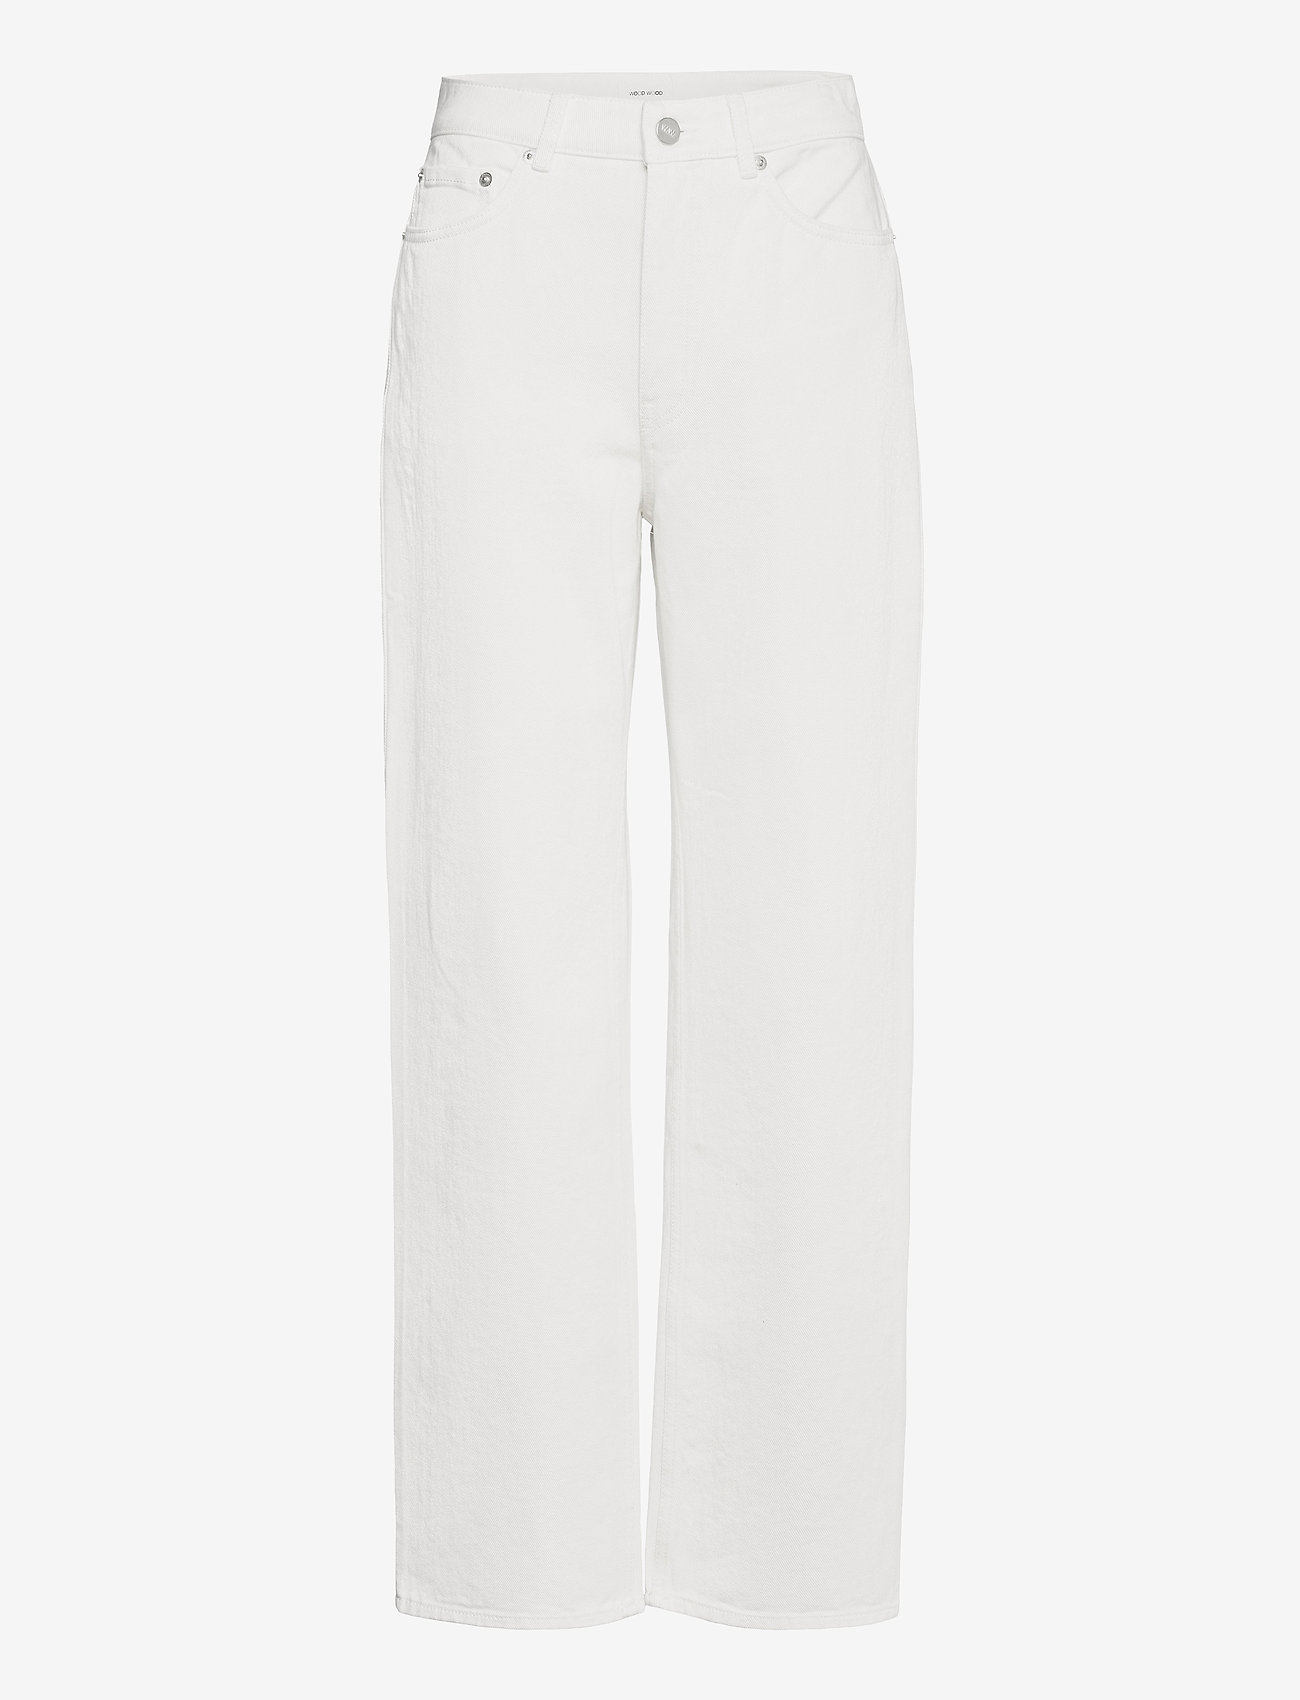 Wood Wood - Ilo jeans - straight jeans - off-white - 0